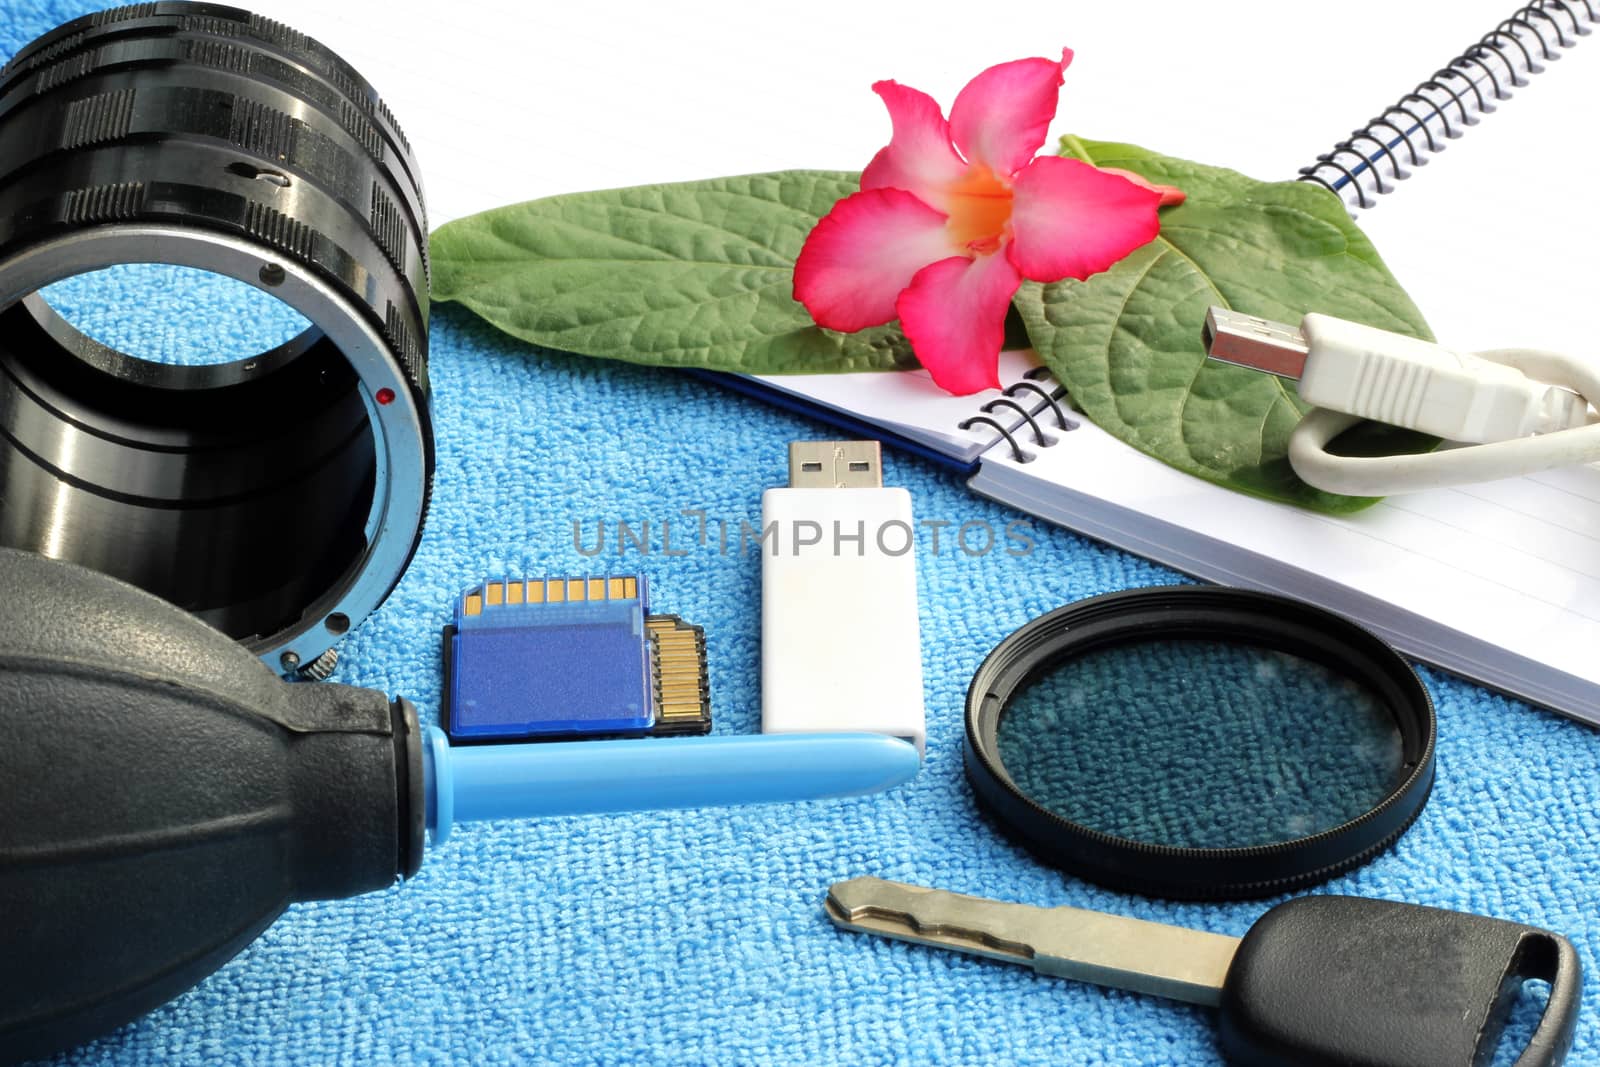 Accessories for traveler and photographer